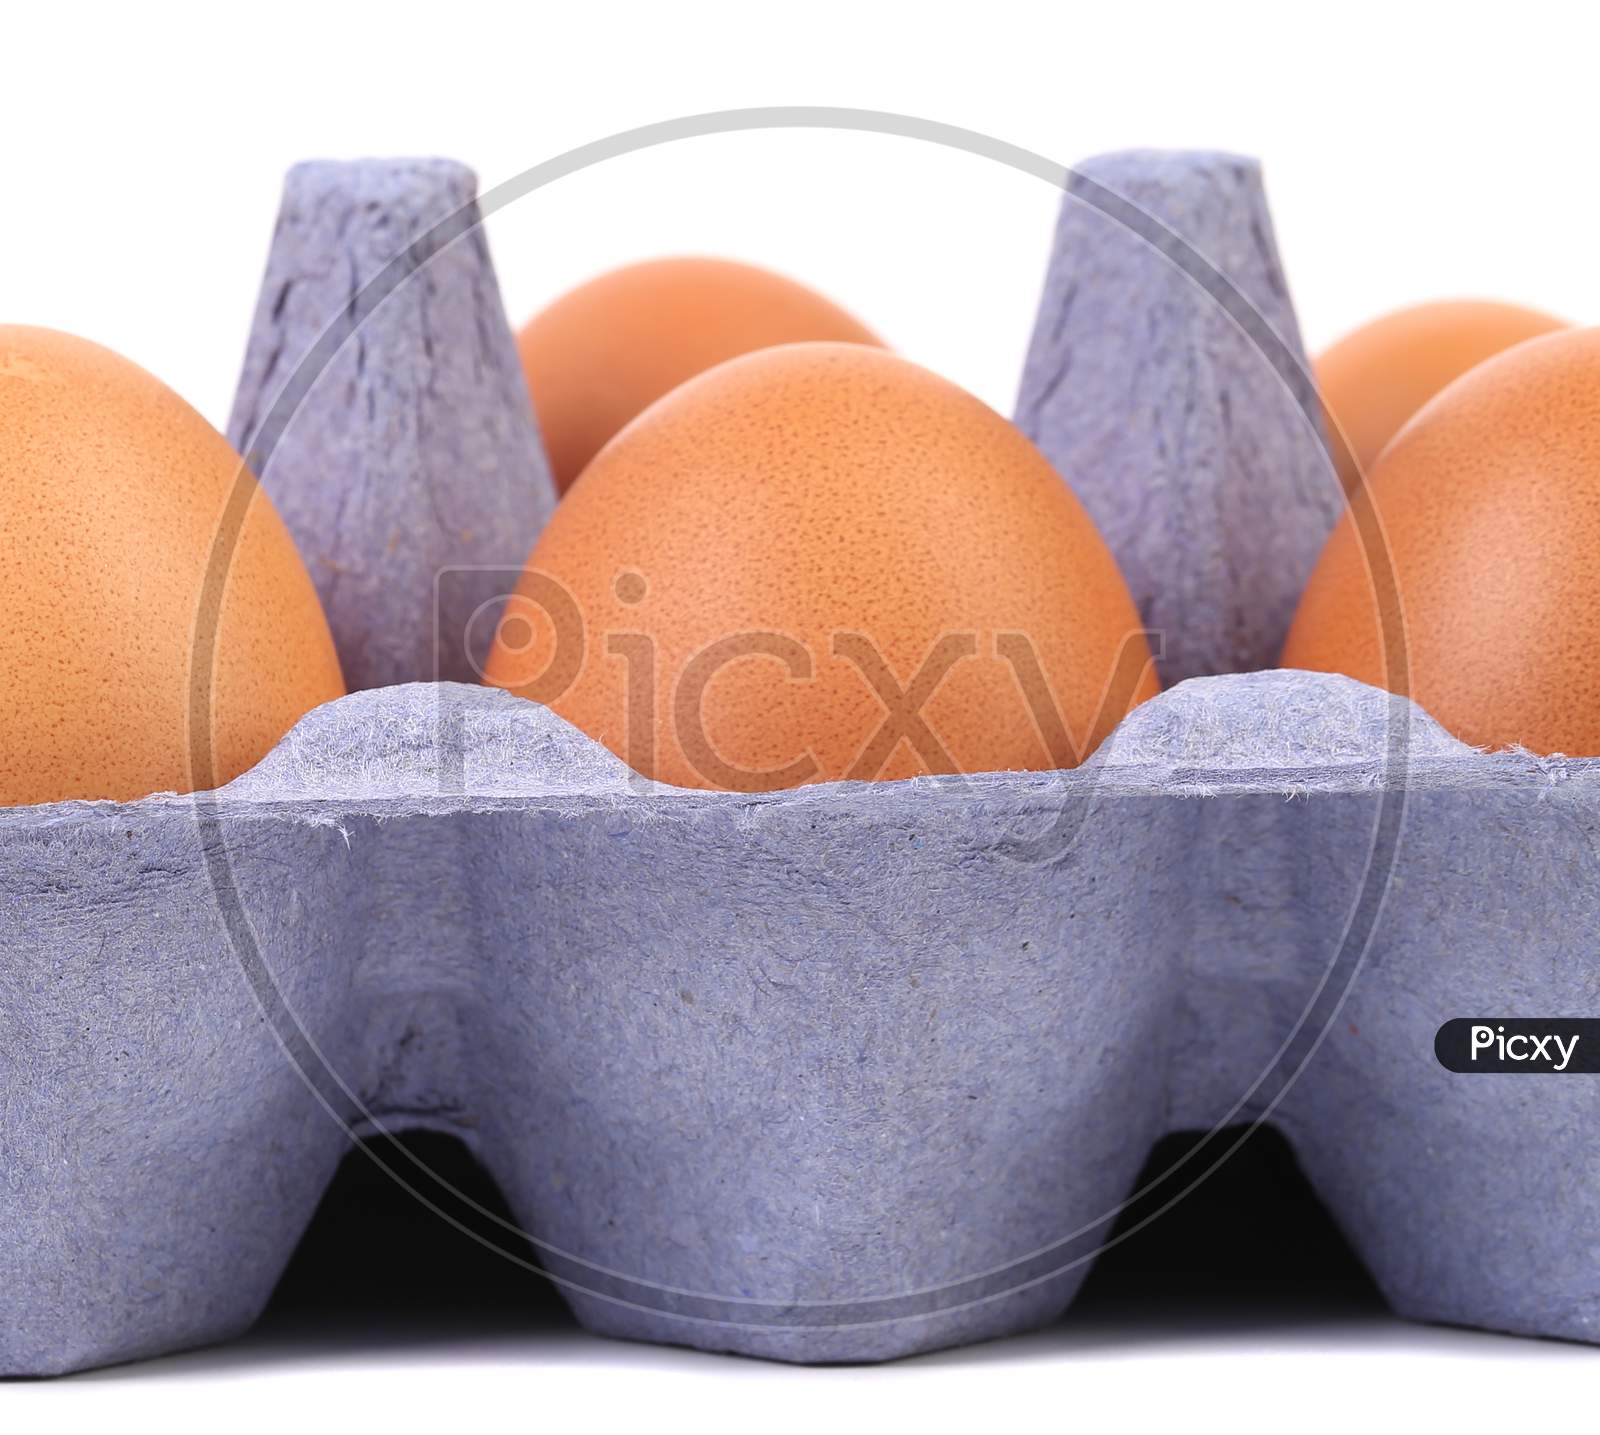 Brown Eggs In Egg Box. Isolated On A White Background.